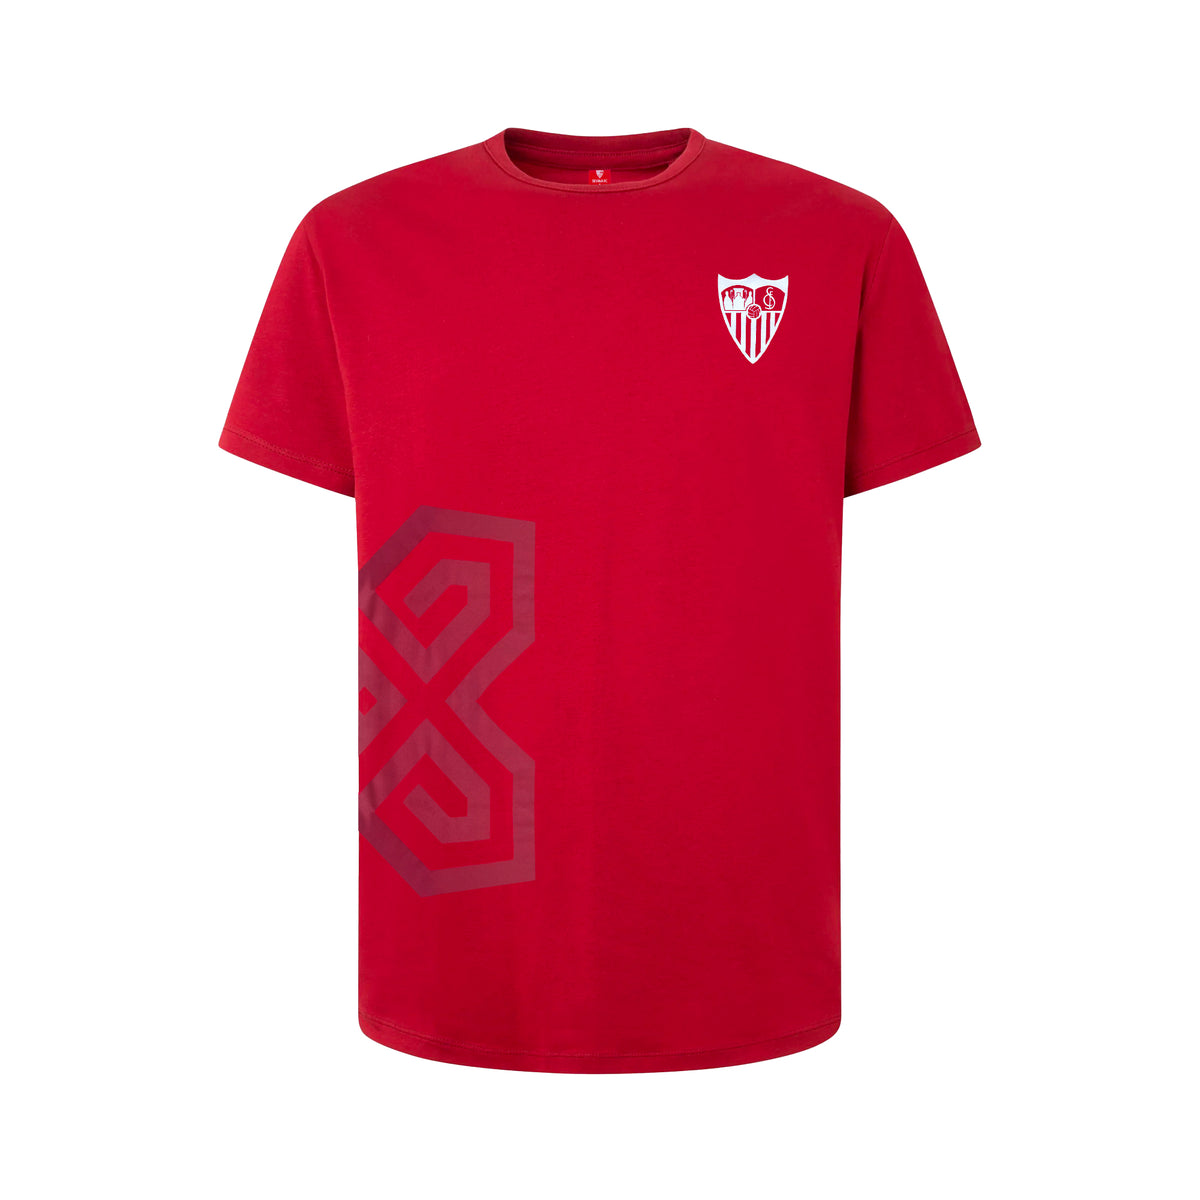 Adult 23/24 Red Shirt White Crest